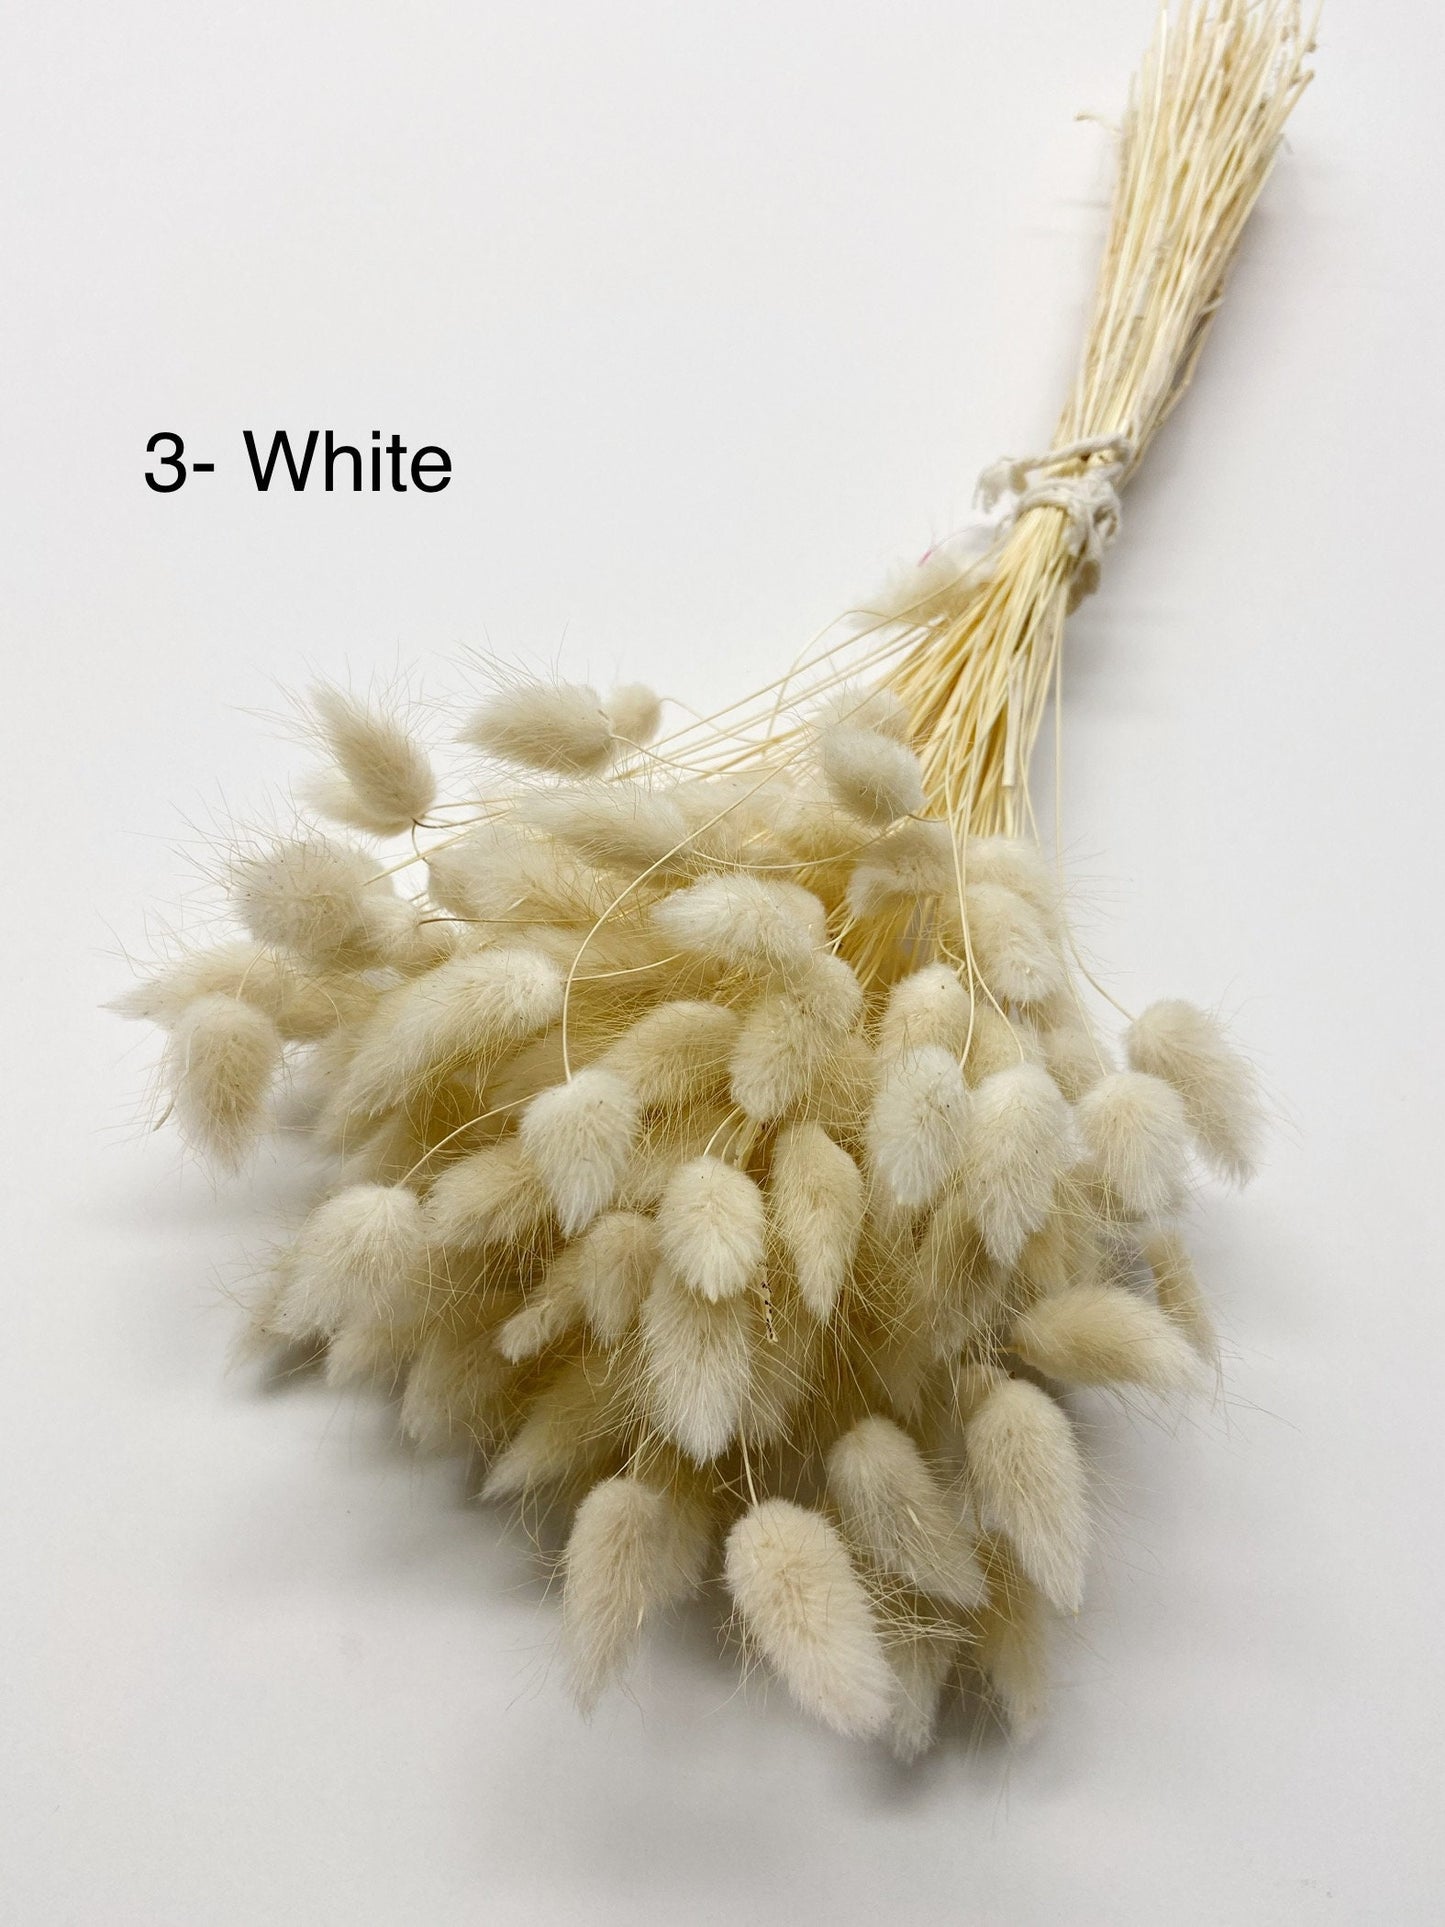 Bunny Tails, Preserved Flowers, Largurus, Dried Largurus, Bunny Tail Grass, Brown, White, Natural, Soft Flowers, House Decor, Wedding Decor